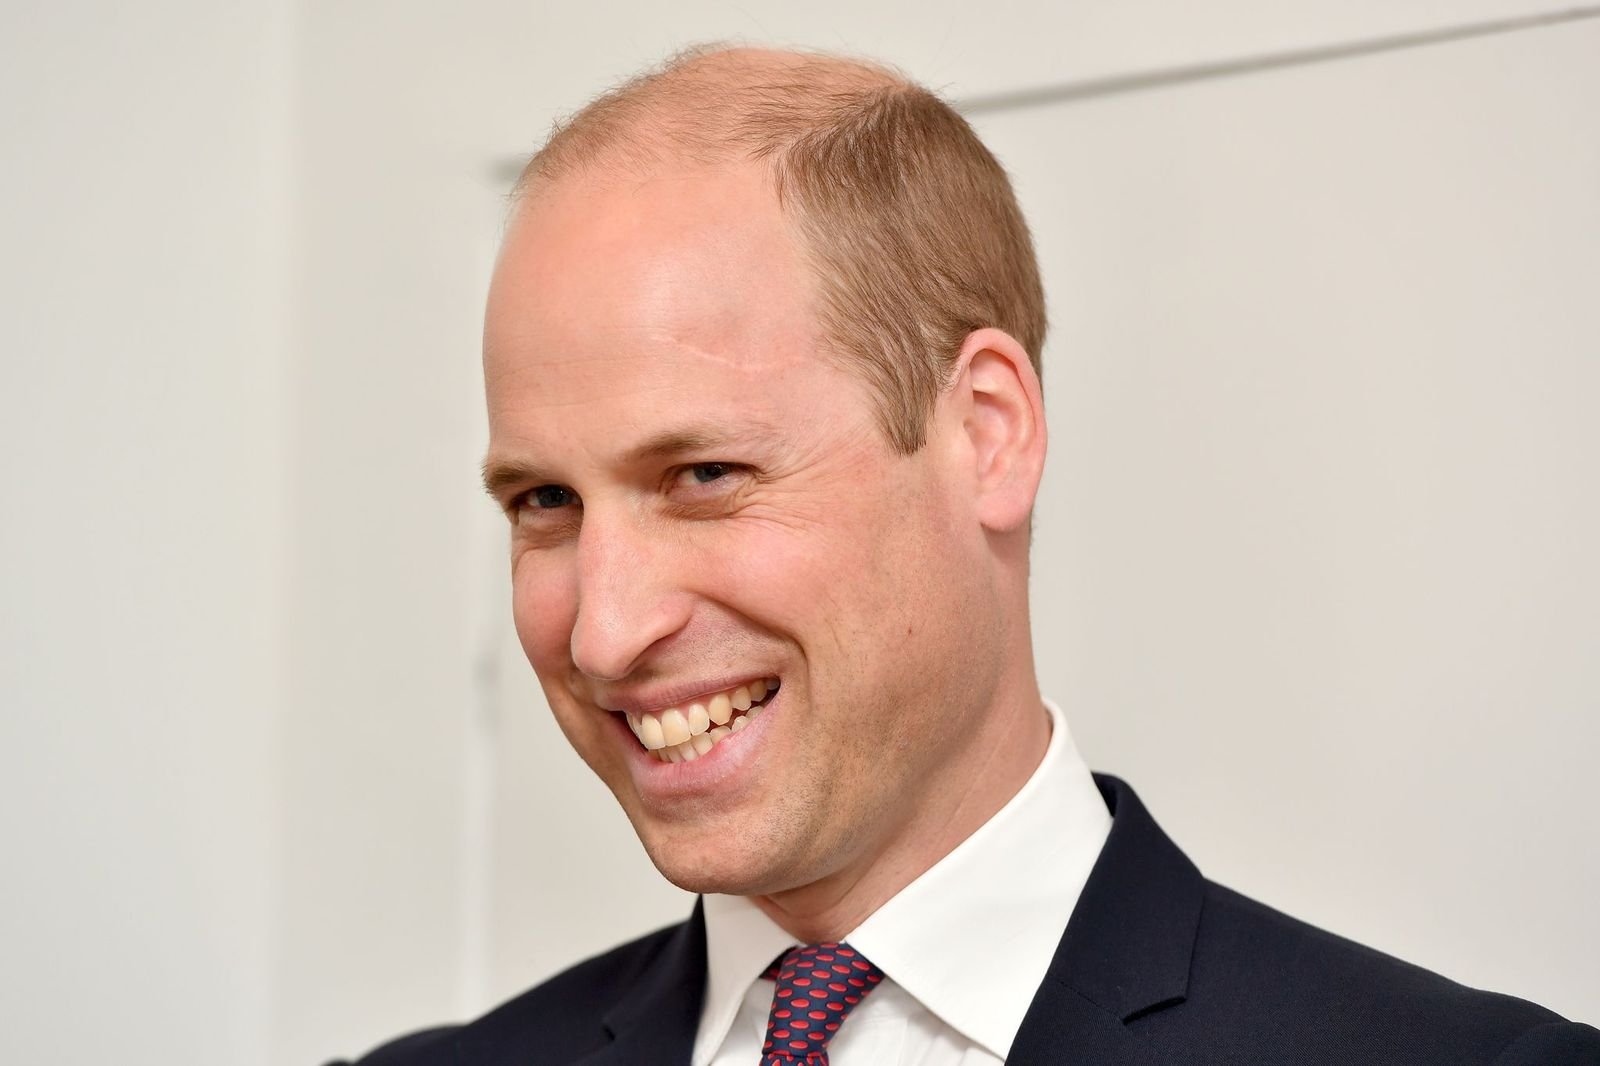 The Duke of Cambridge at James' Place clinical center in Liverpool in 2018 in Liverpool, England | Source: Getty Images